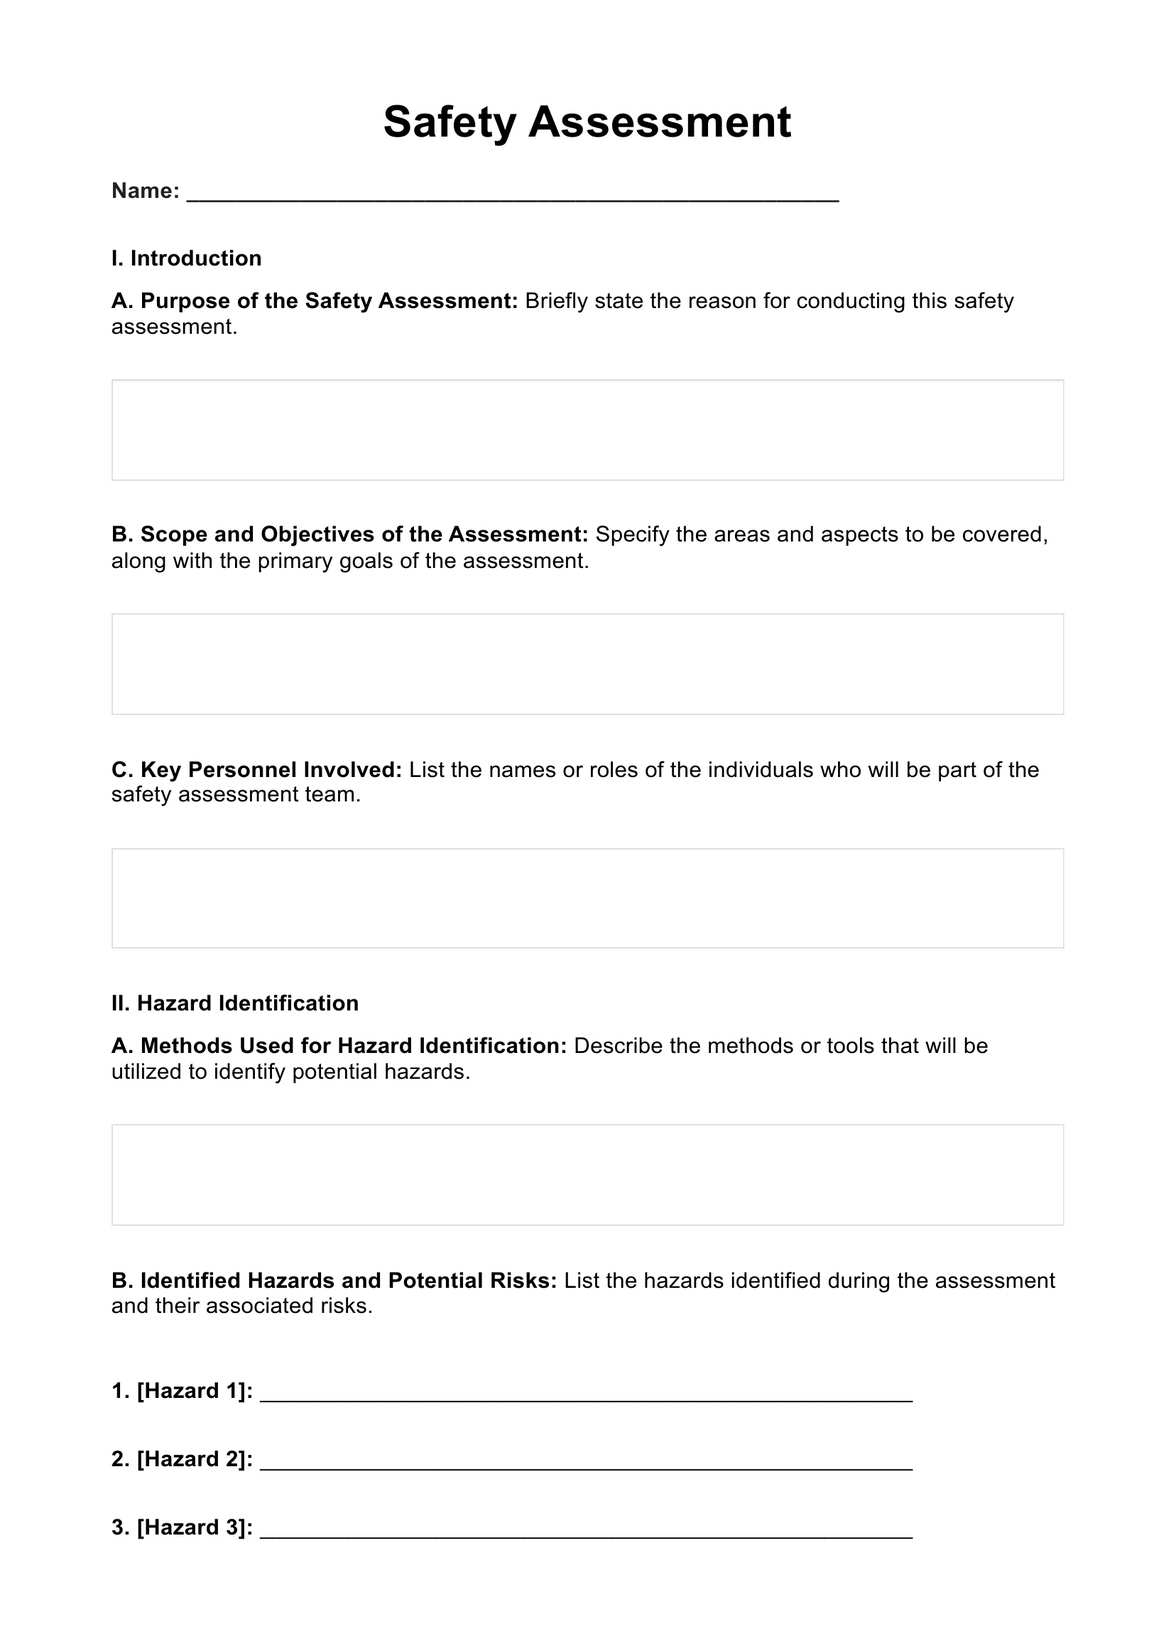 Safety Assessment PDF Example